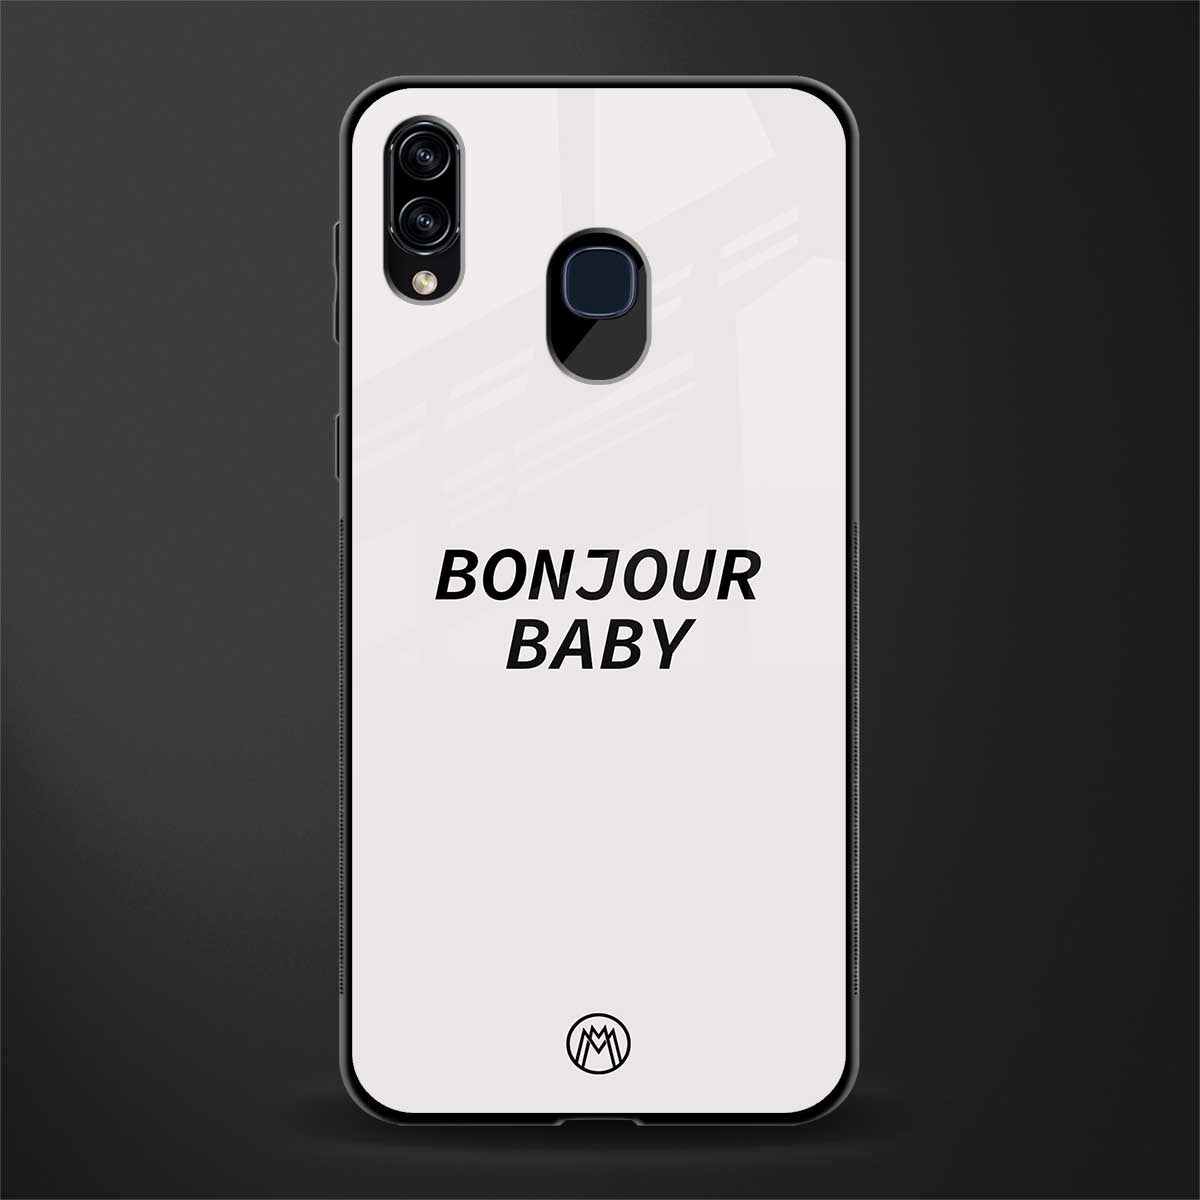 bonjour baby glass case for samsung galaxy a30 image